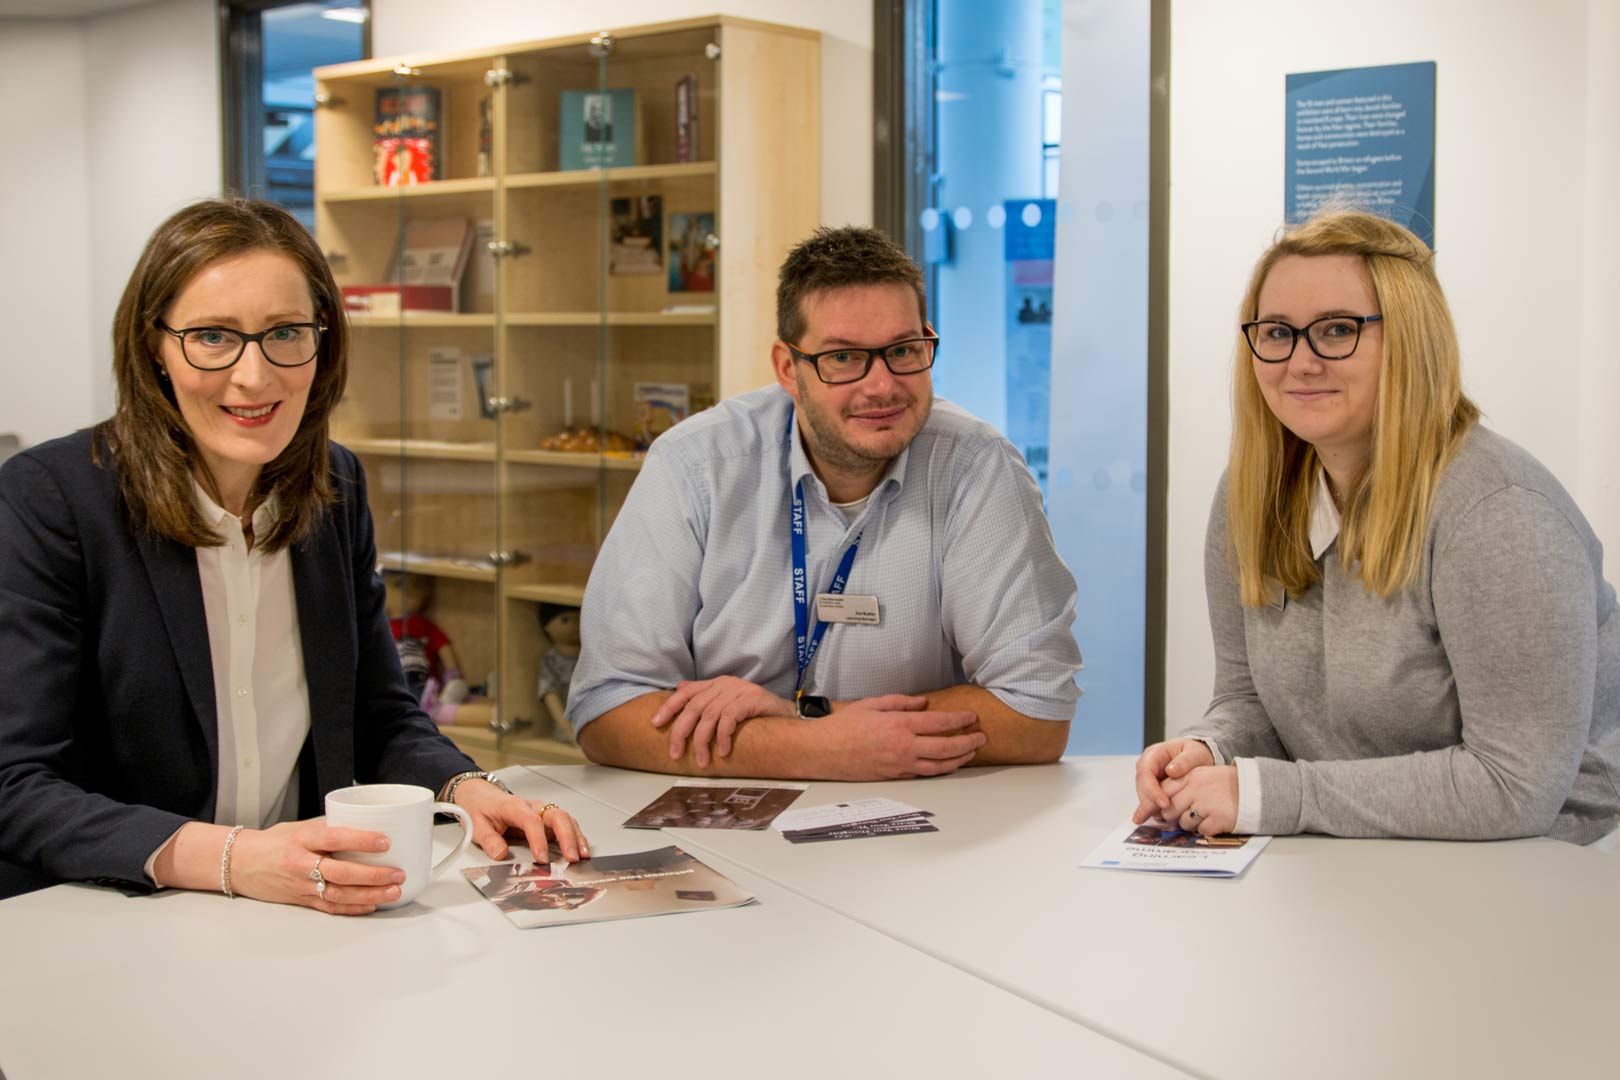 Emma King, Director of Holocaust Exhbition and Learning Centre, Jim Butler Learning Manager and Hannah Randall, alumni and Administration and Learning Assistant